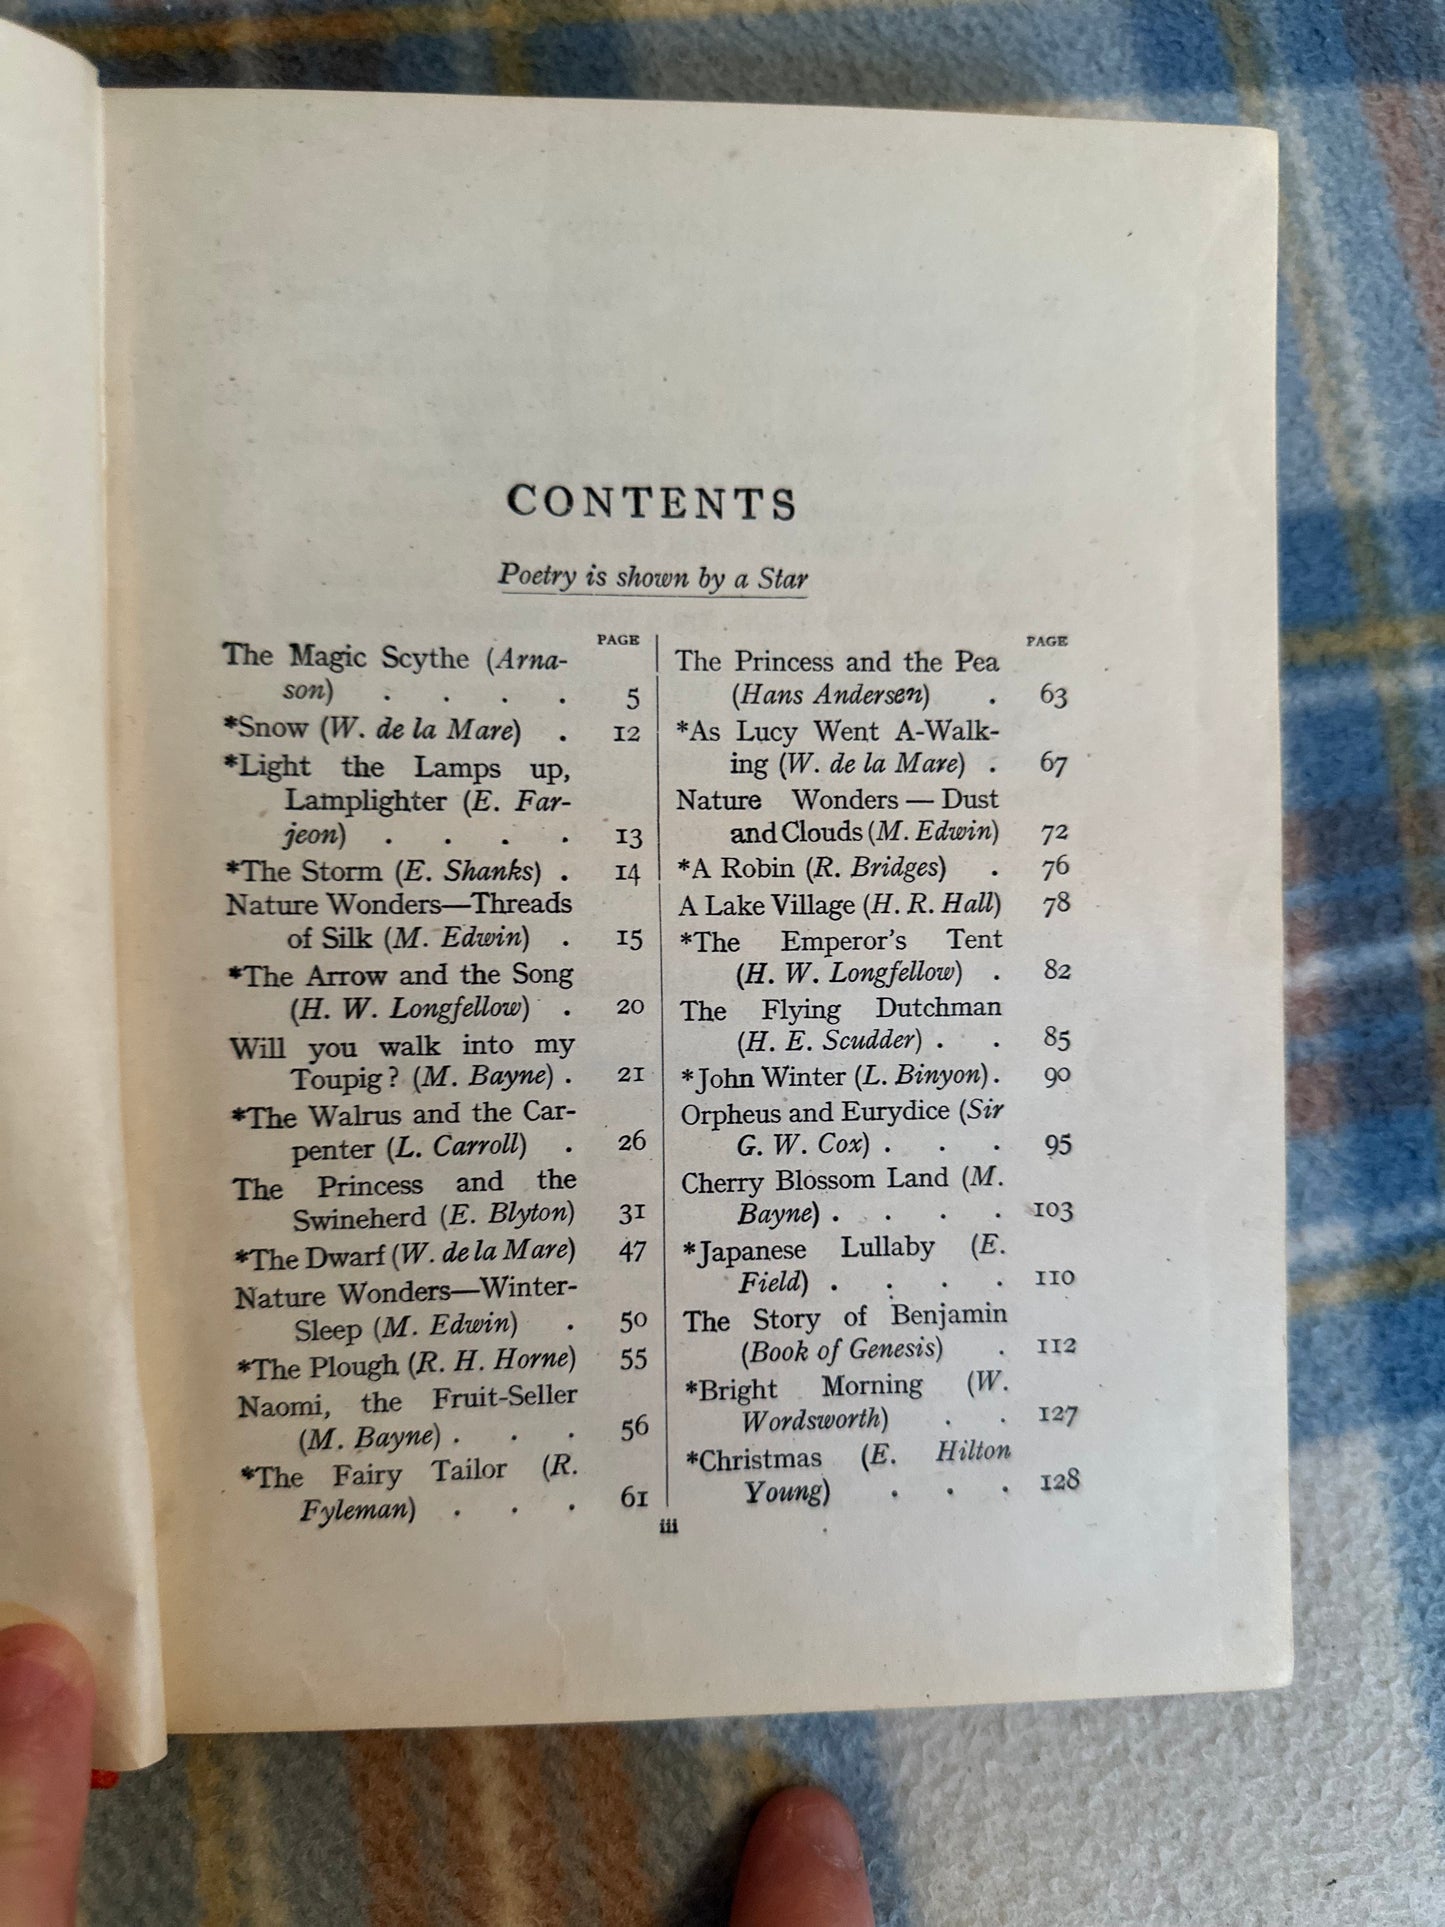 1946 Talk Of Many Things - Compiled by Richard Wilson(Thomas Nelson & Sons Ltd)